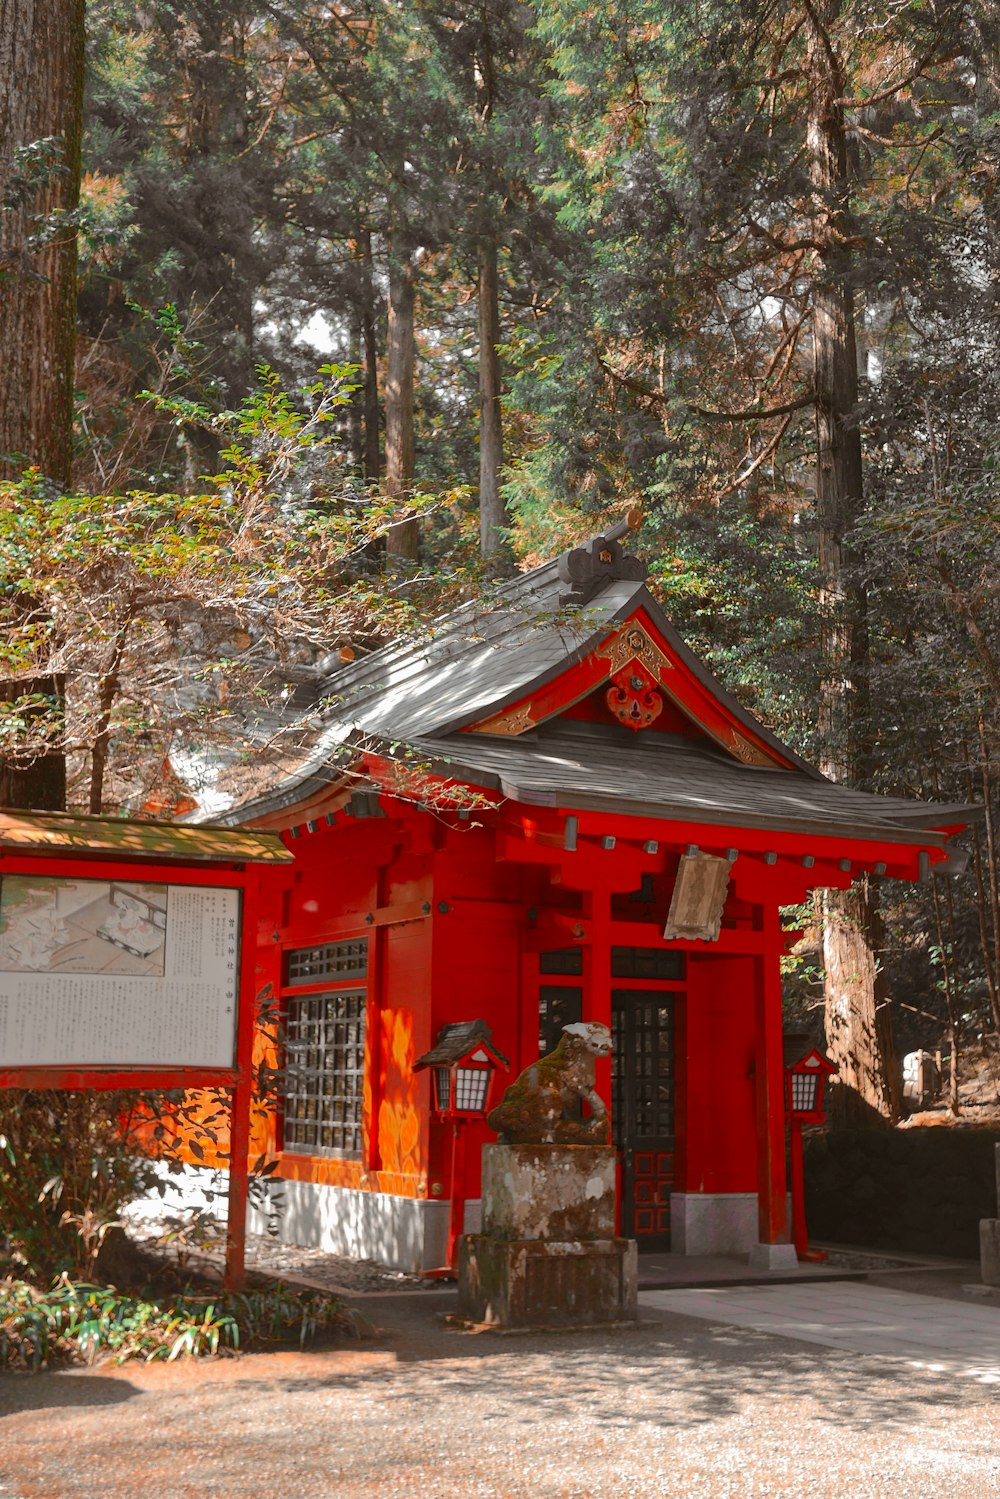 a small red building in the middle of a forest